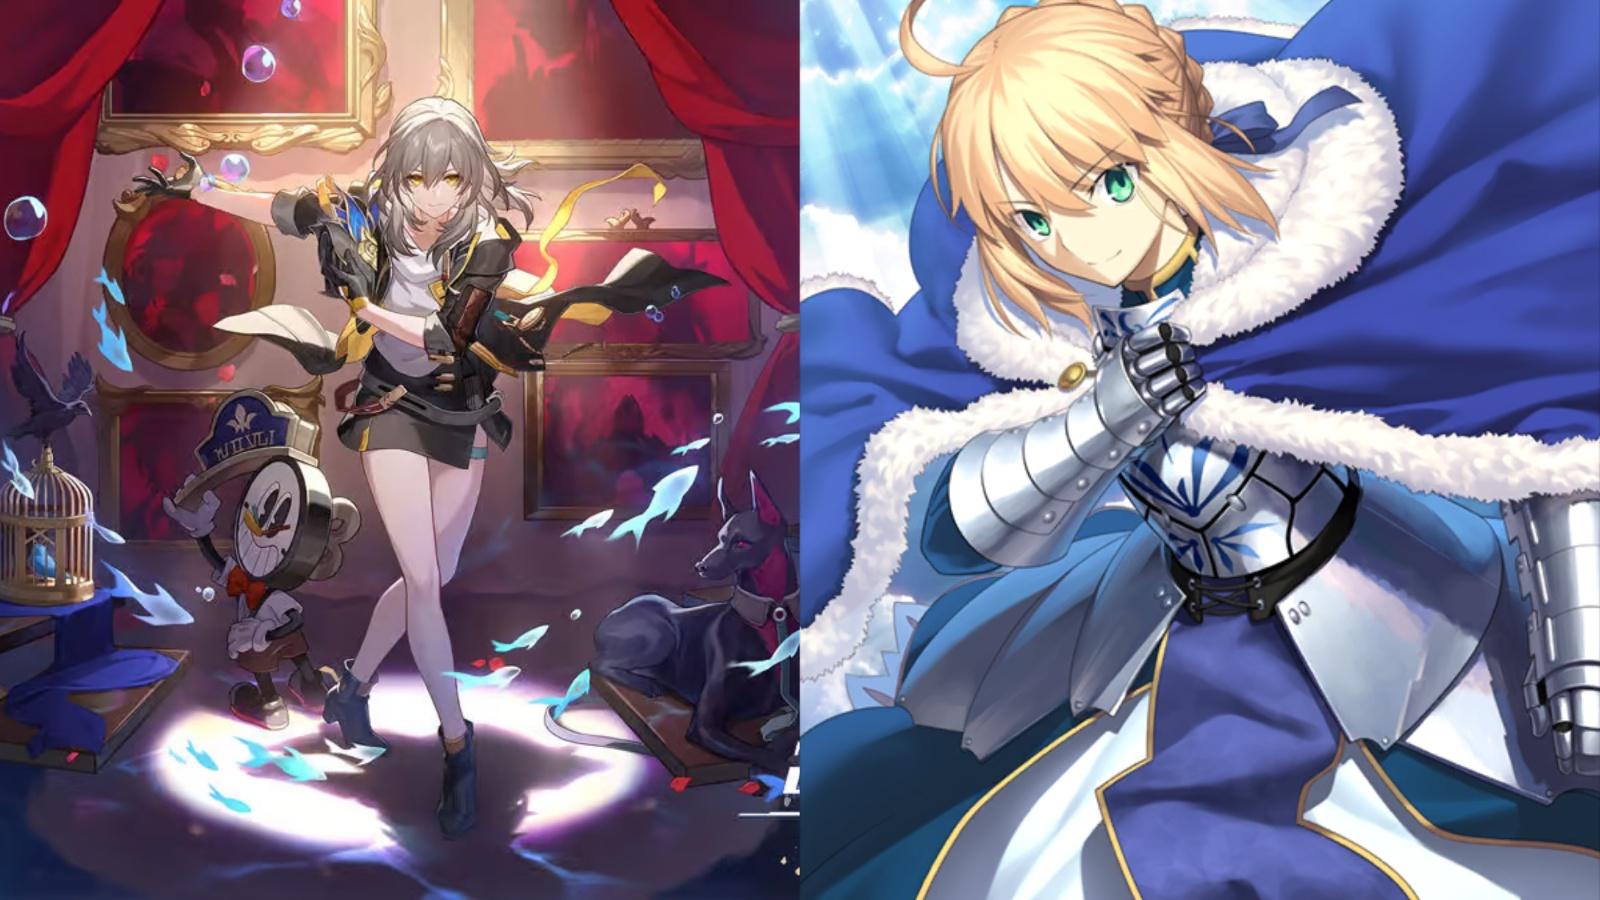 An image of Trailblazer from Honkai Star Rail and Artoria from Fate Grand Order